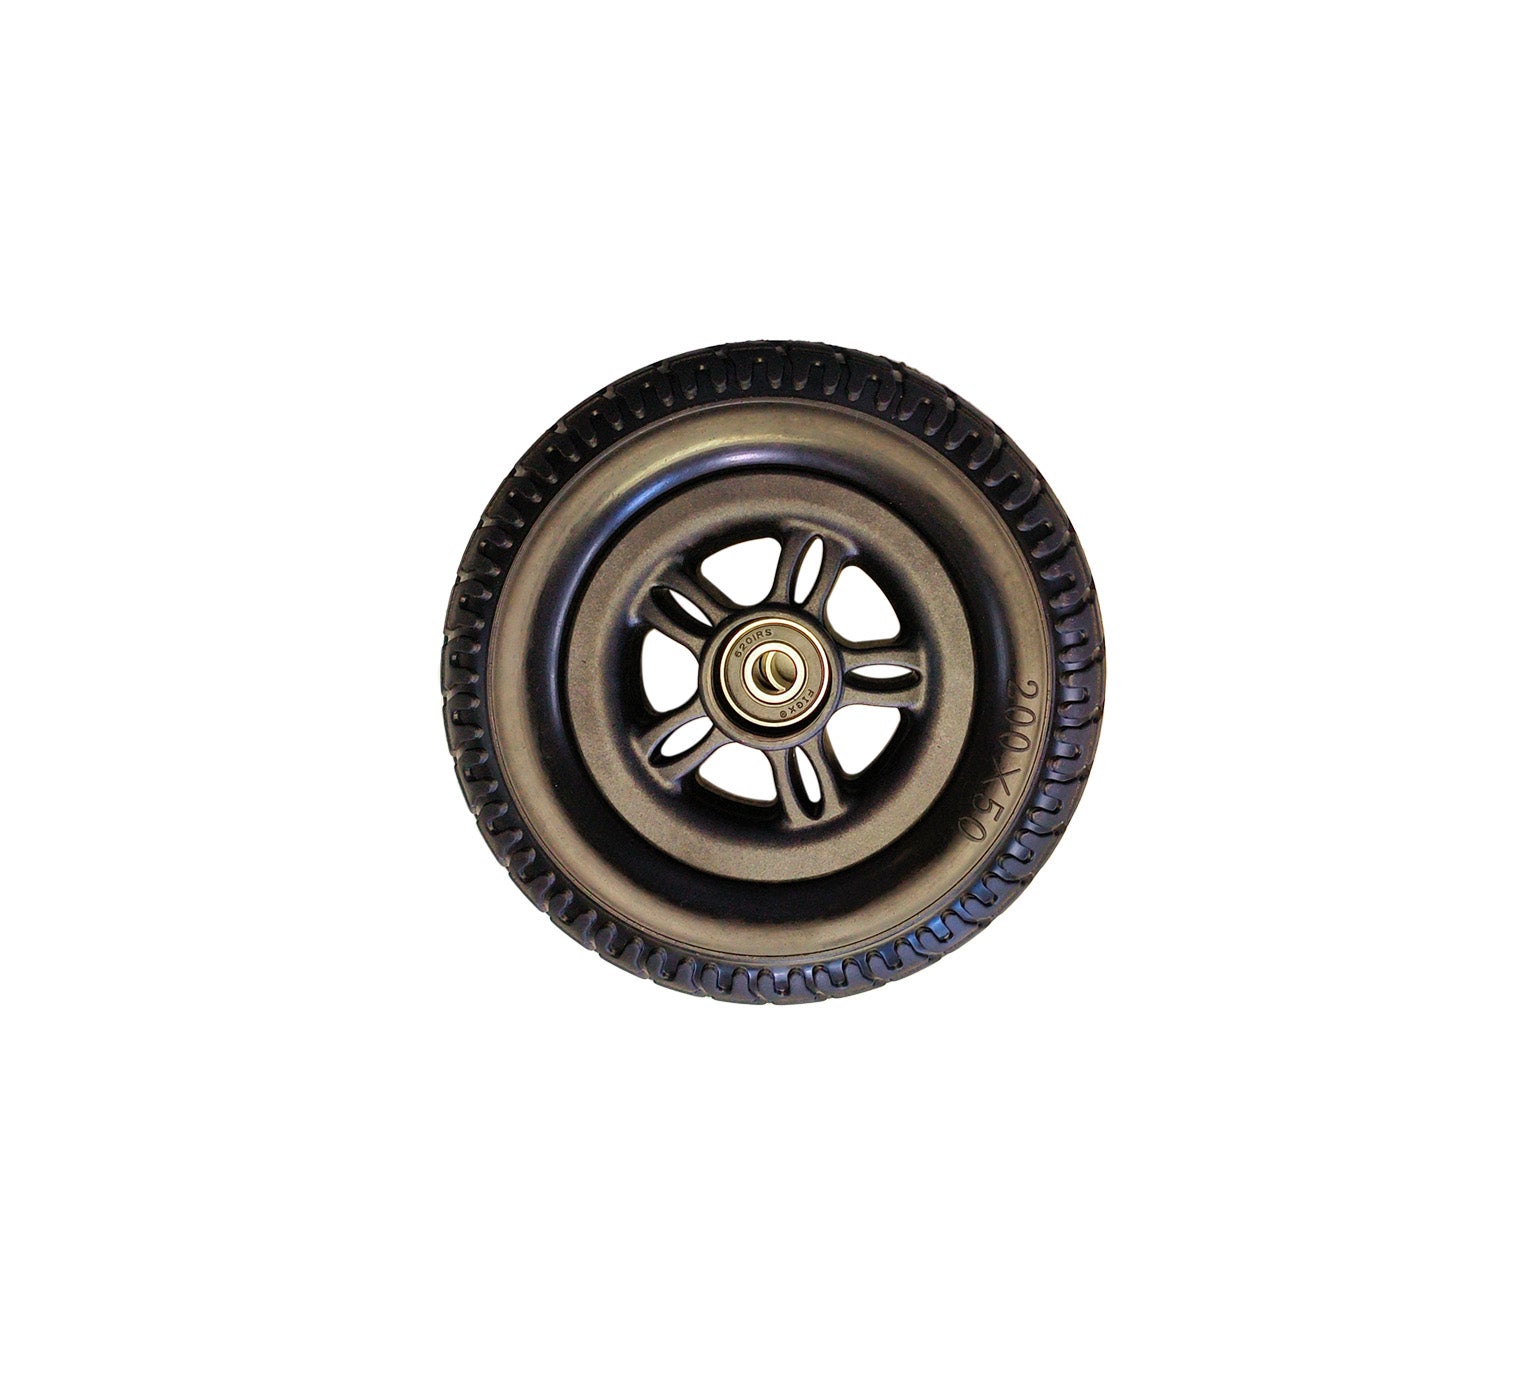 200x50 Front Tyre with Black Rim and Cap